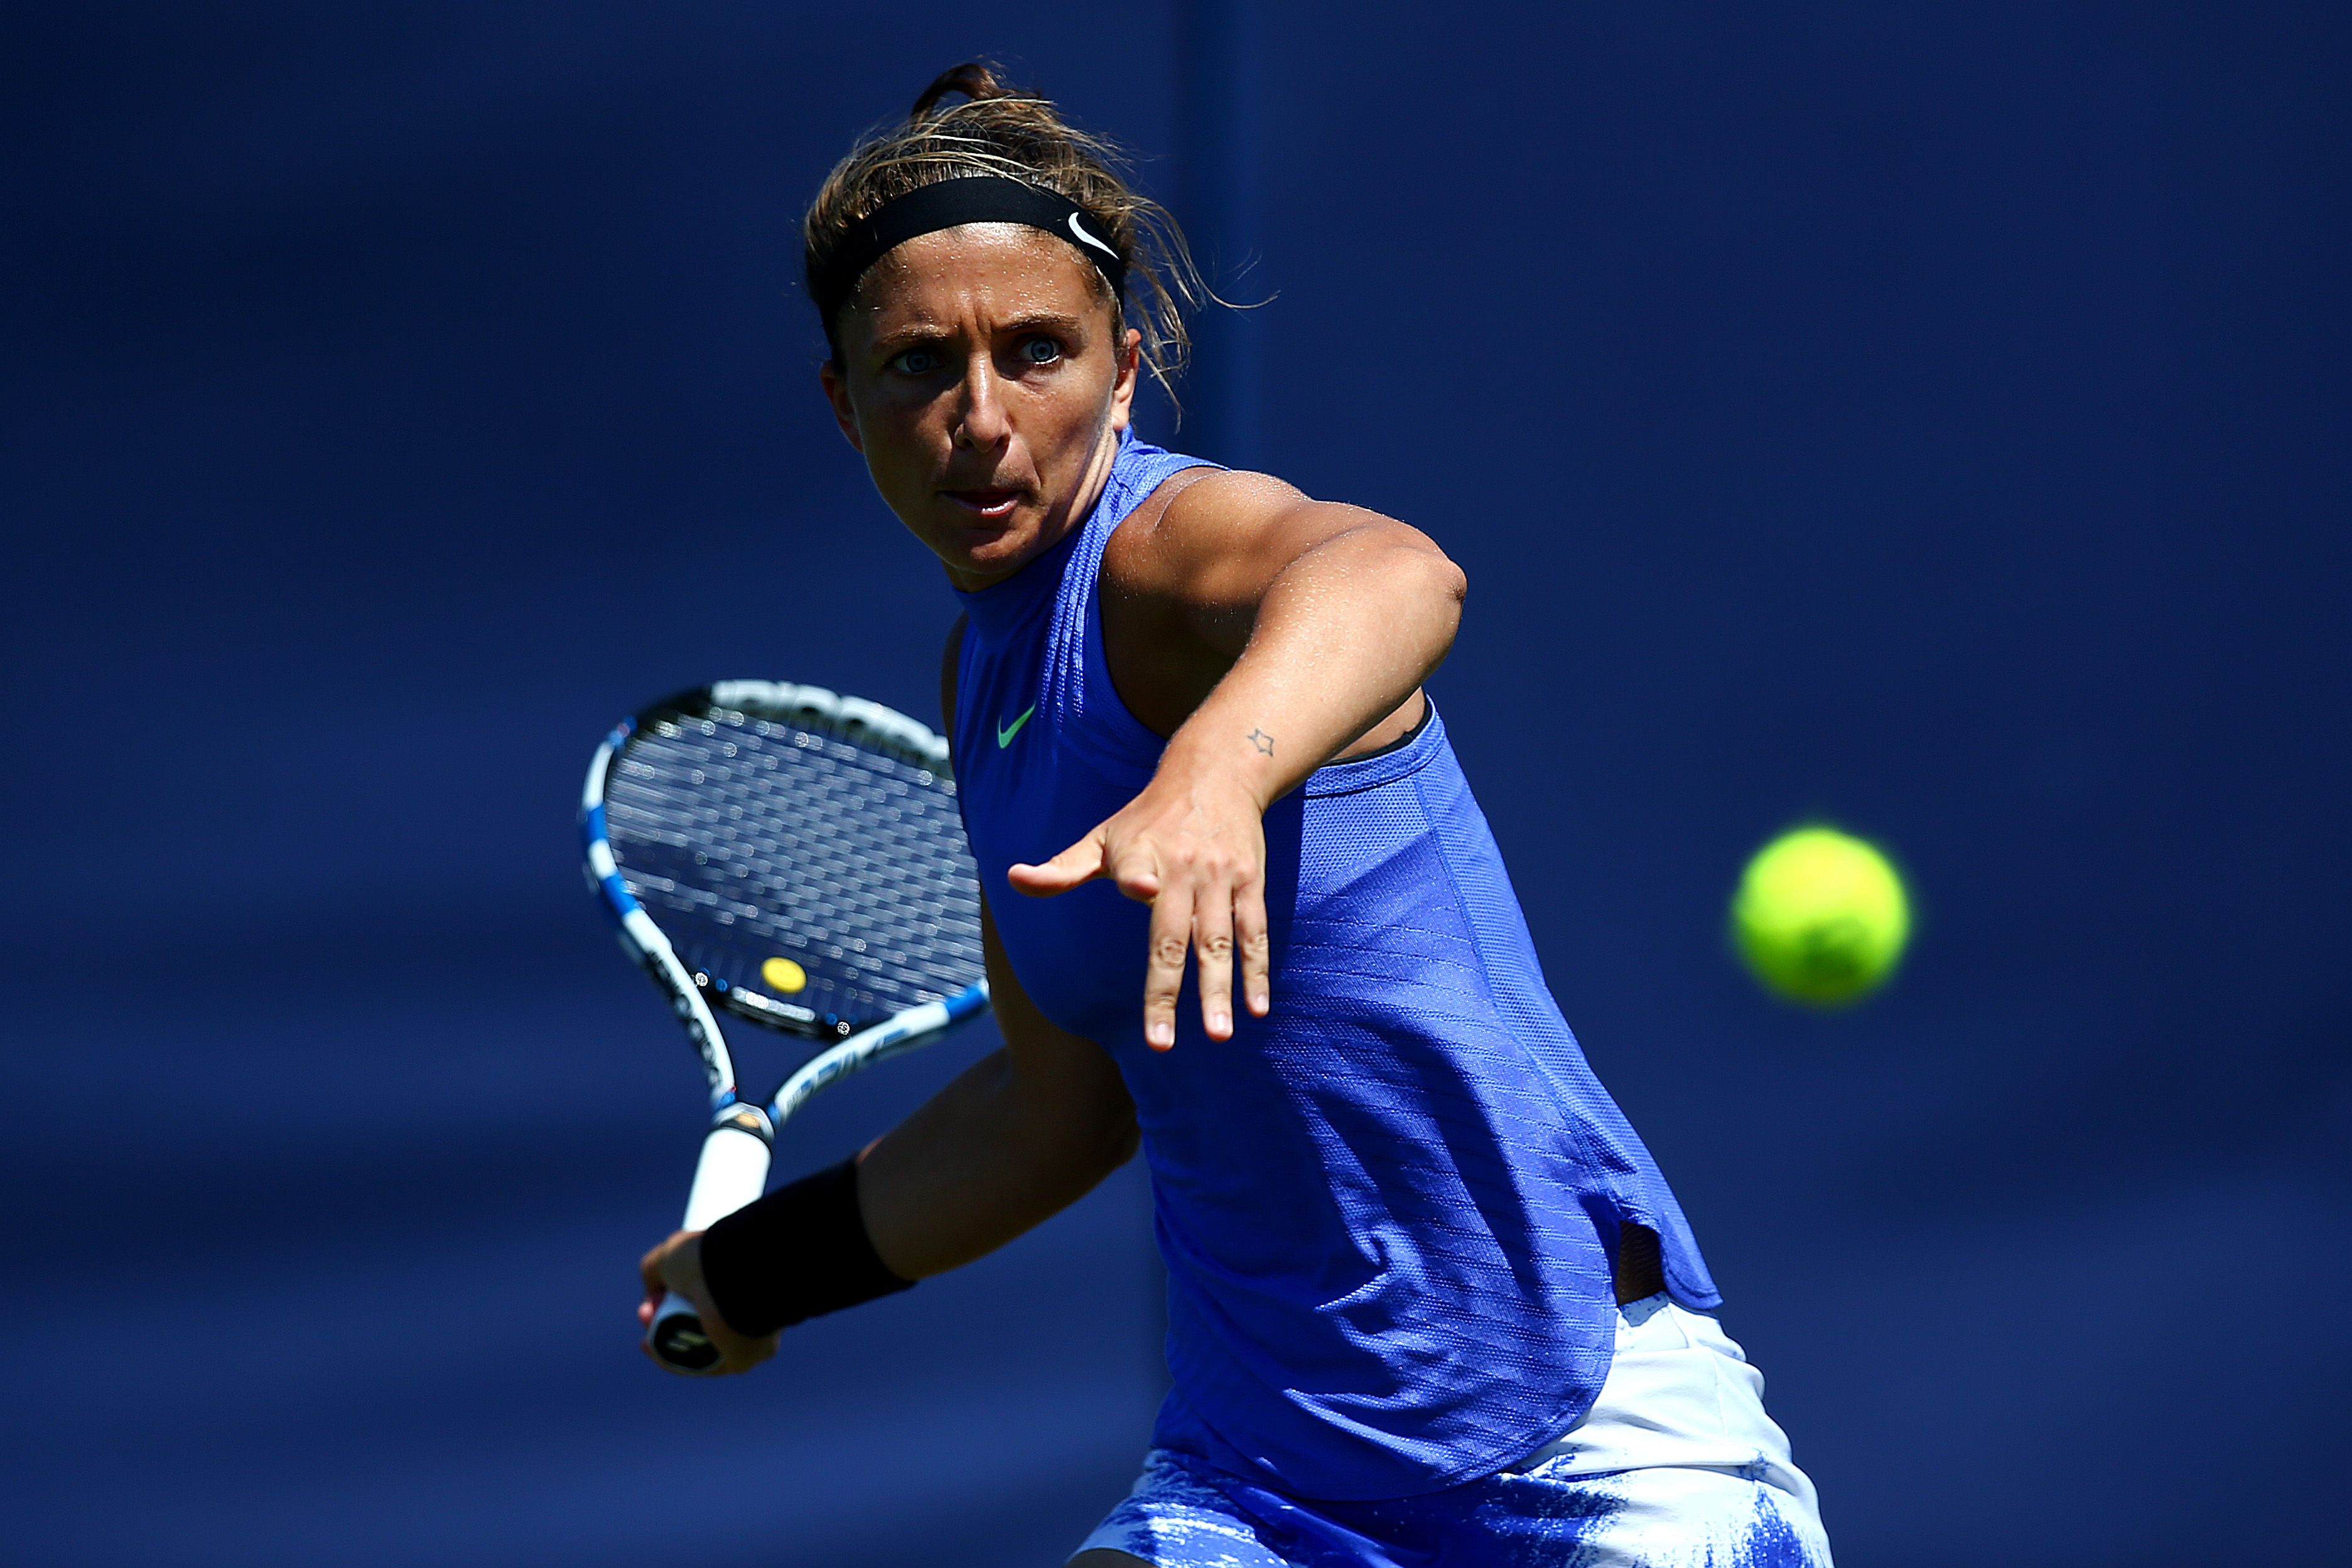 Sara Errani's suspension extended to 10 months for anti-doping violation